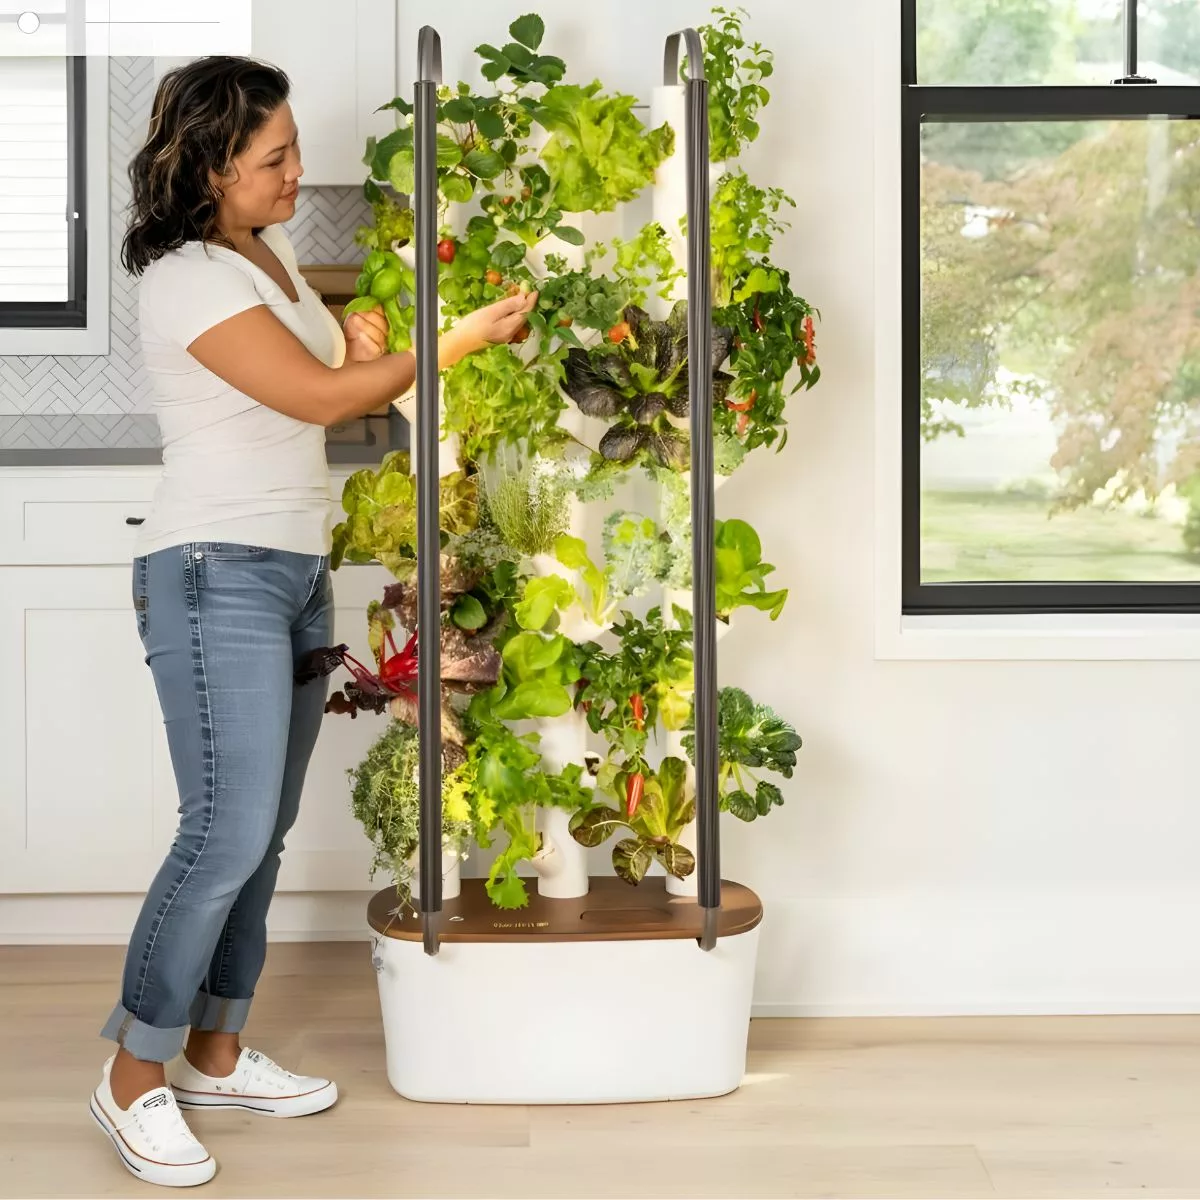 Hydroponic Growing System